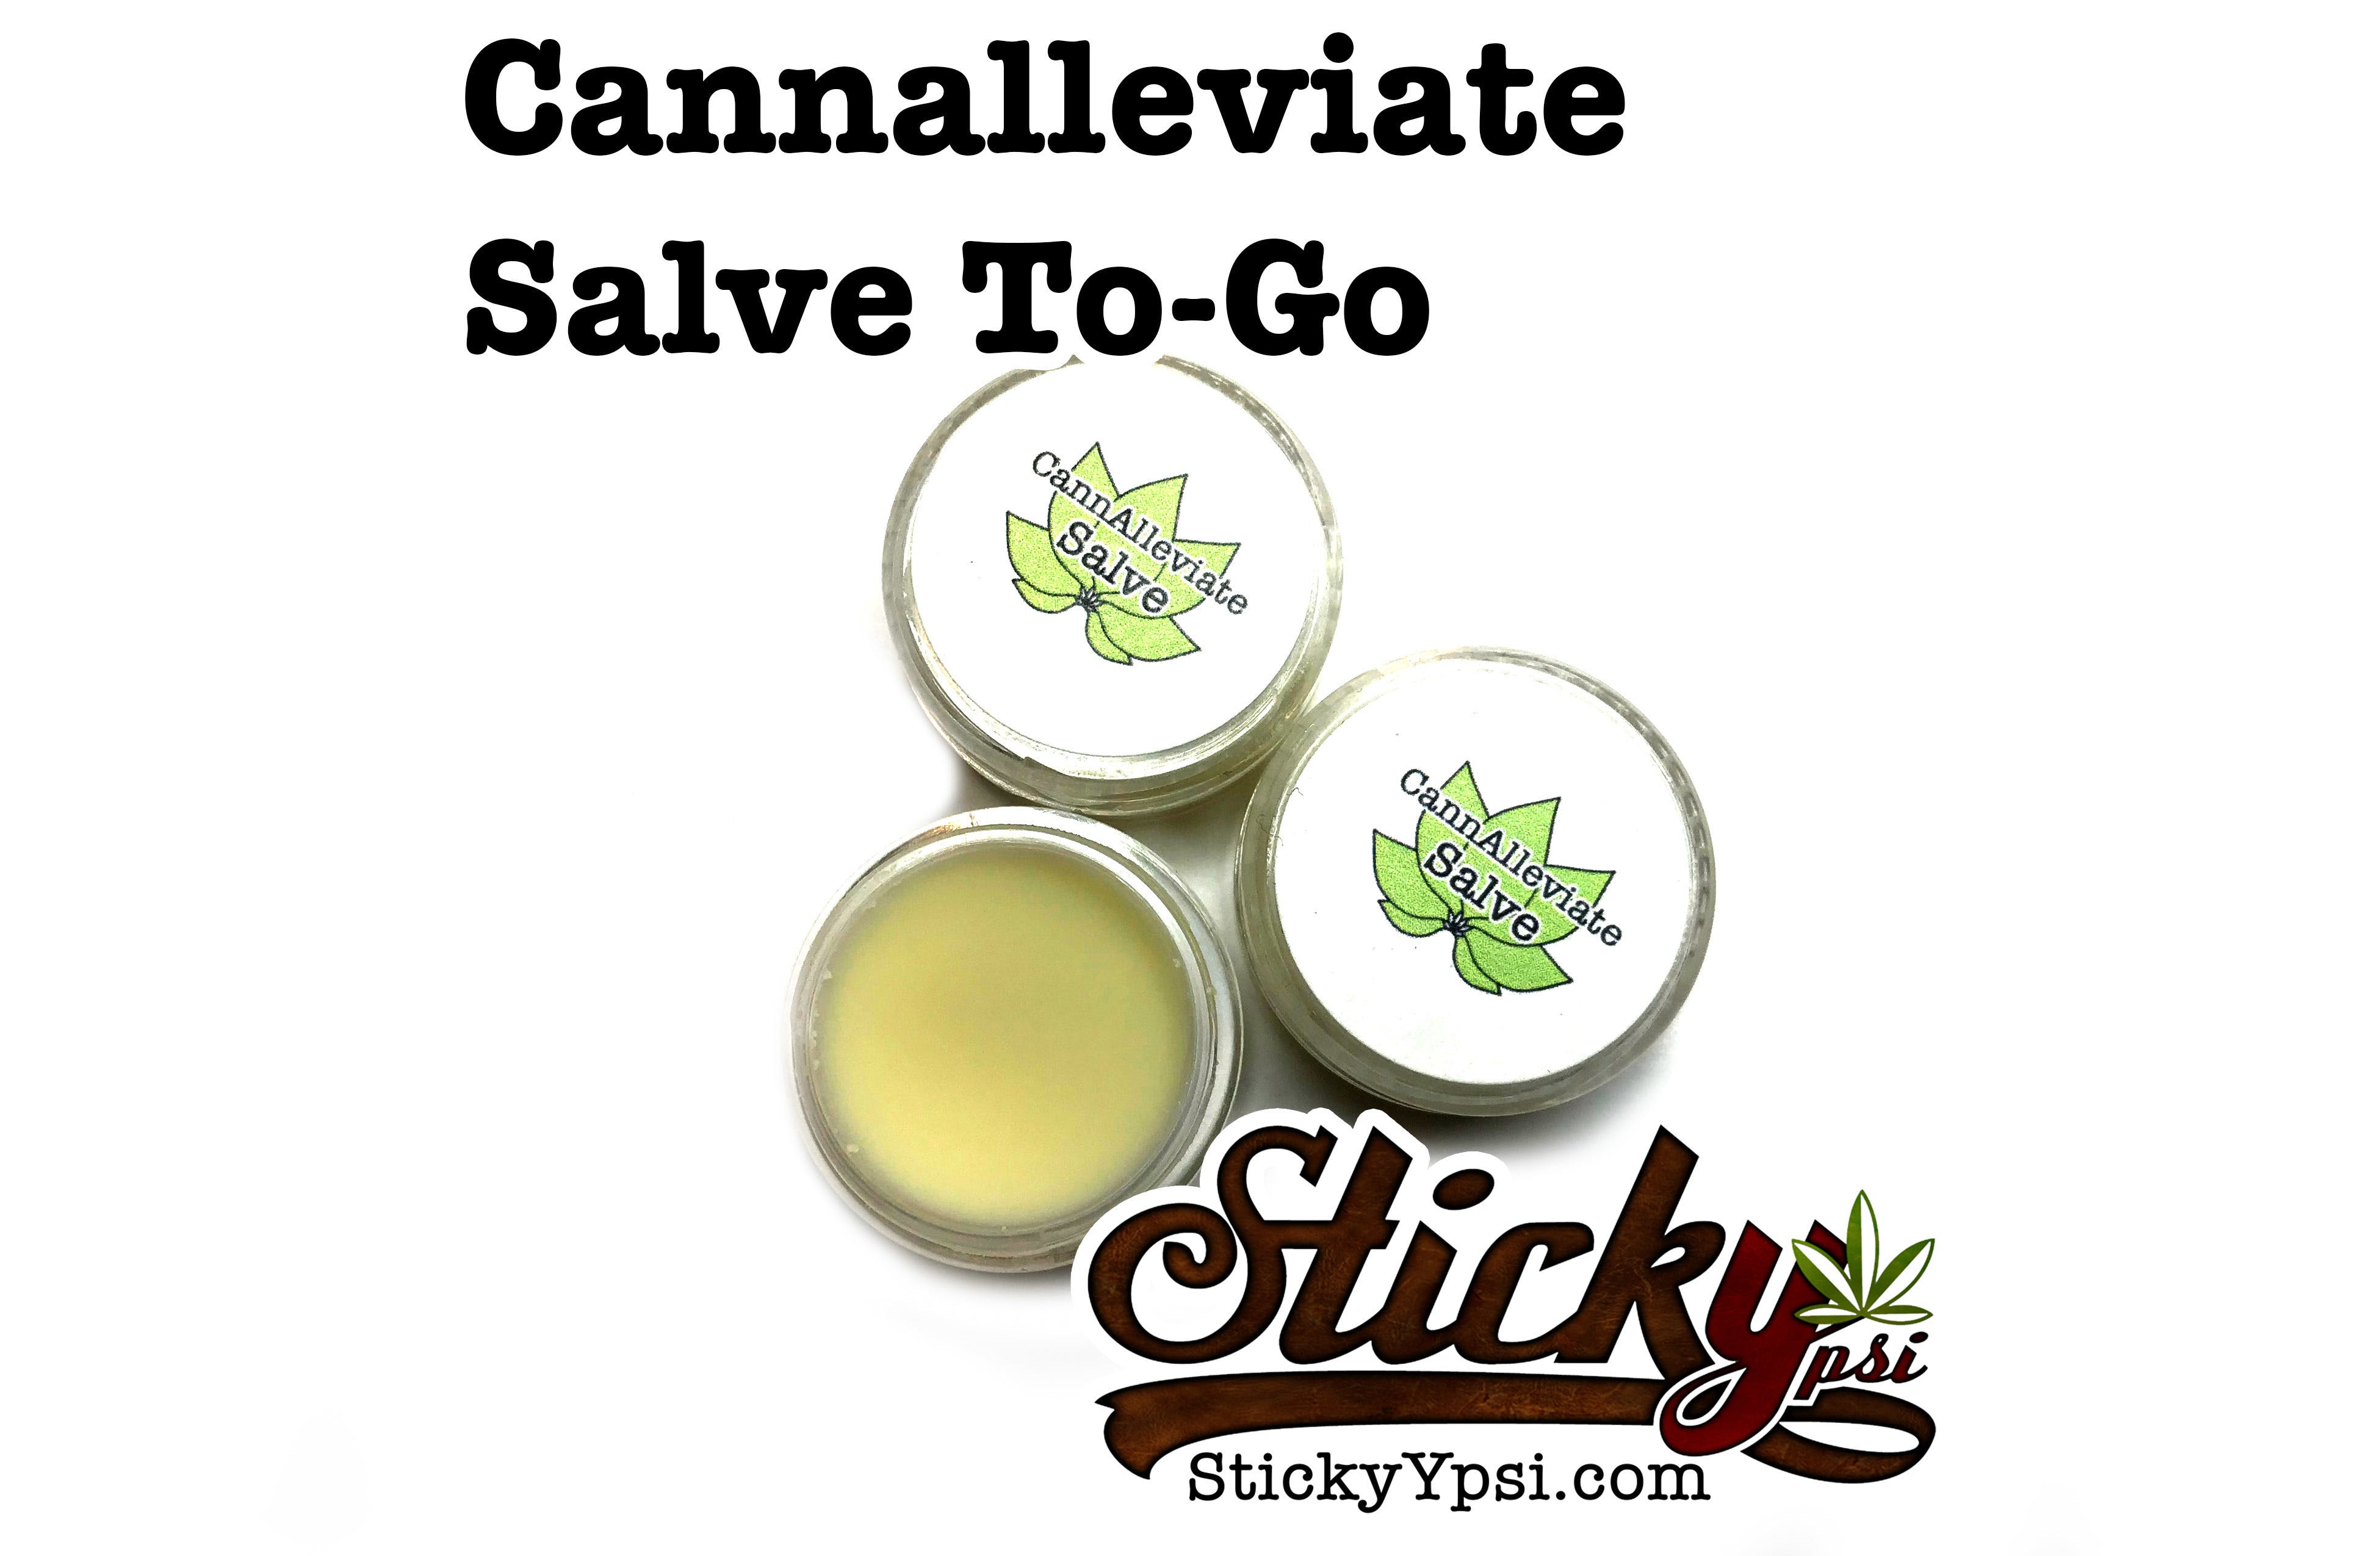 topicals-cannalleviate-salve-to-go-21-10mg